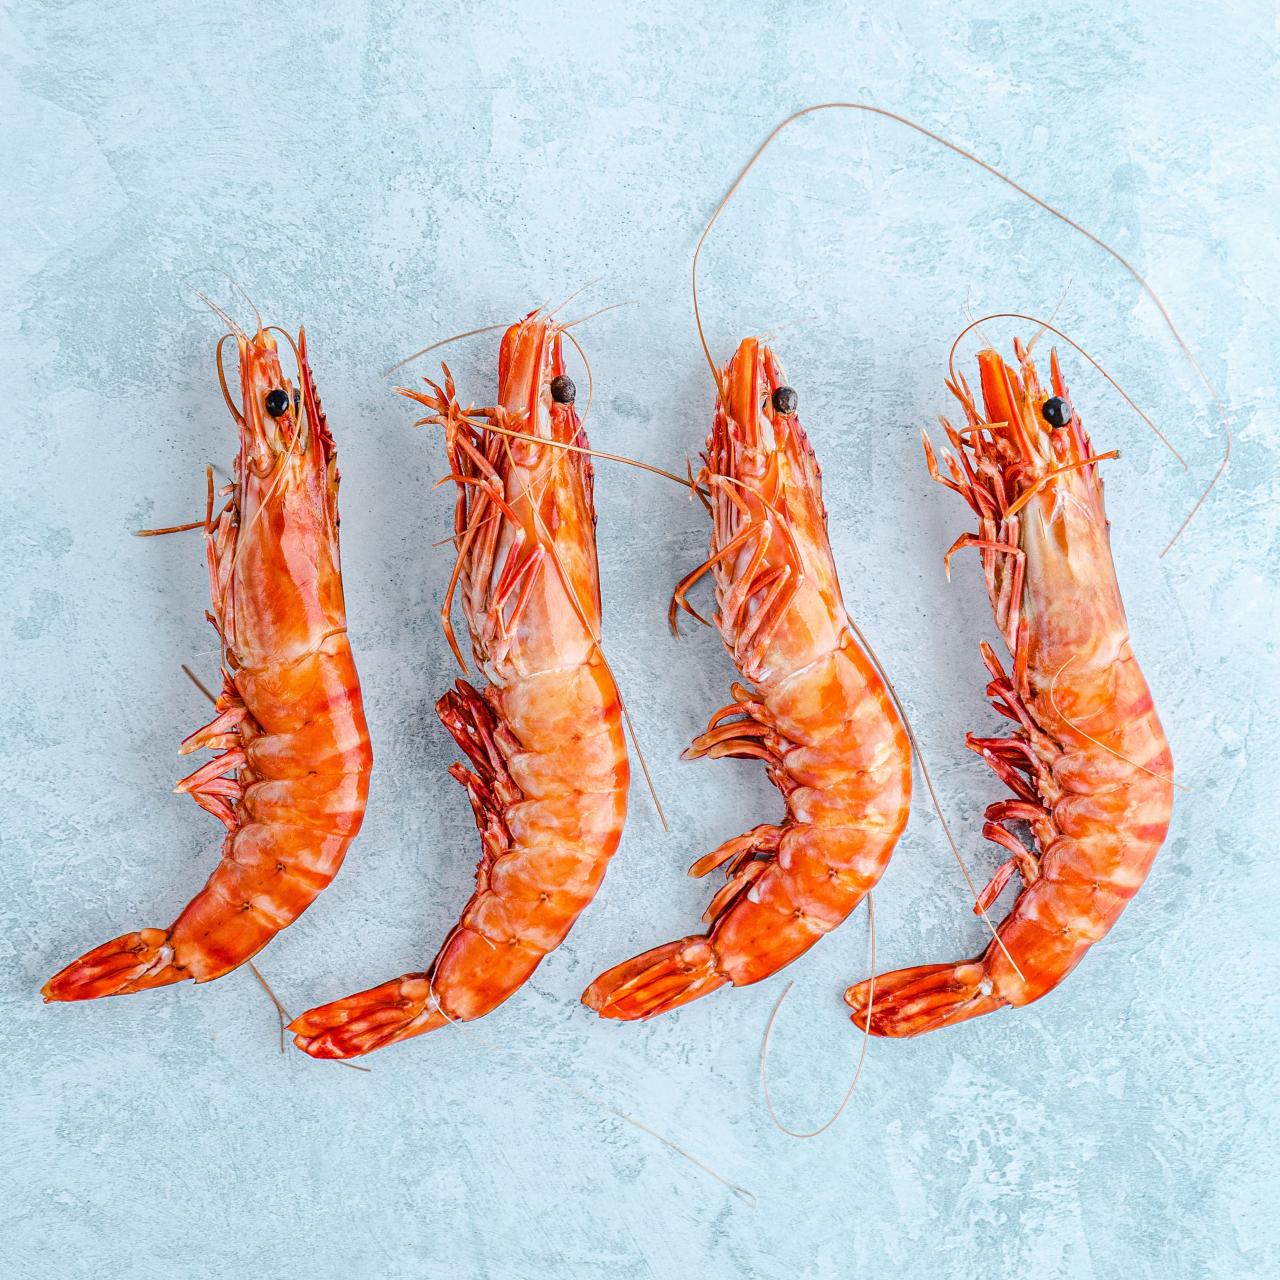 Buy Shrimps Online | Next Day Delivery – The Fish Society